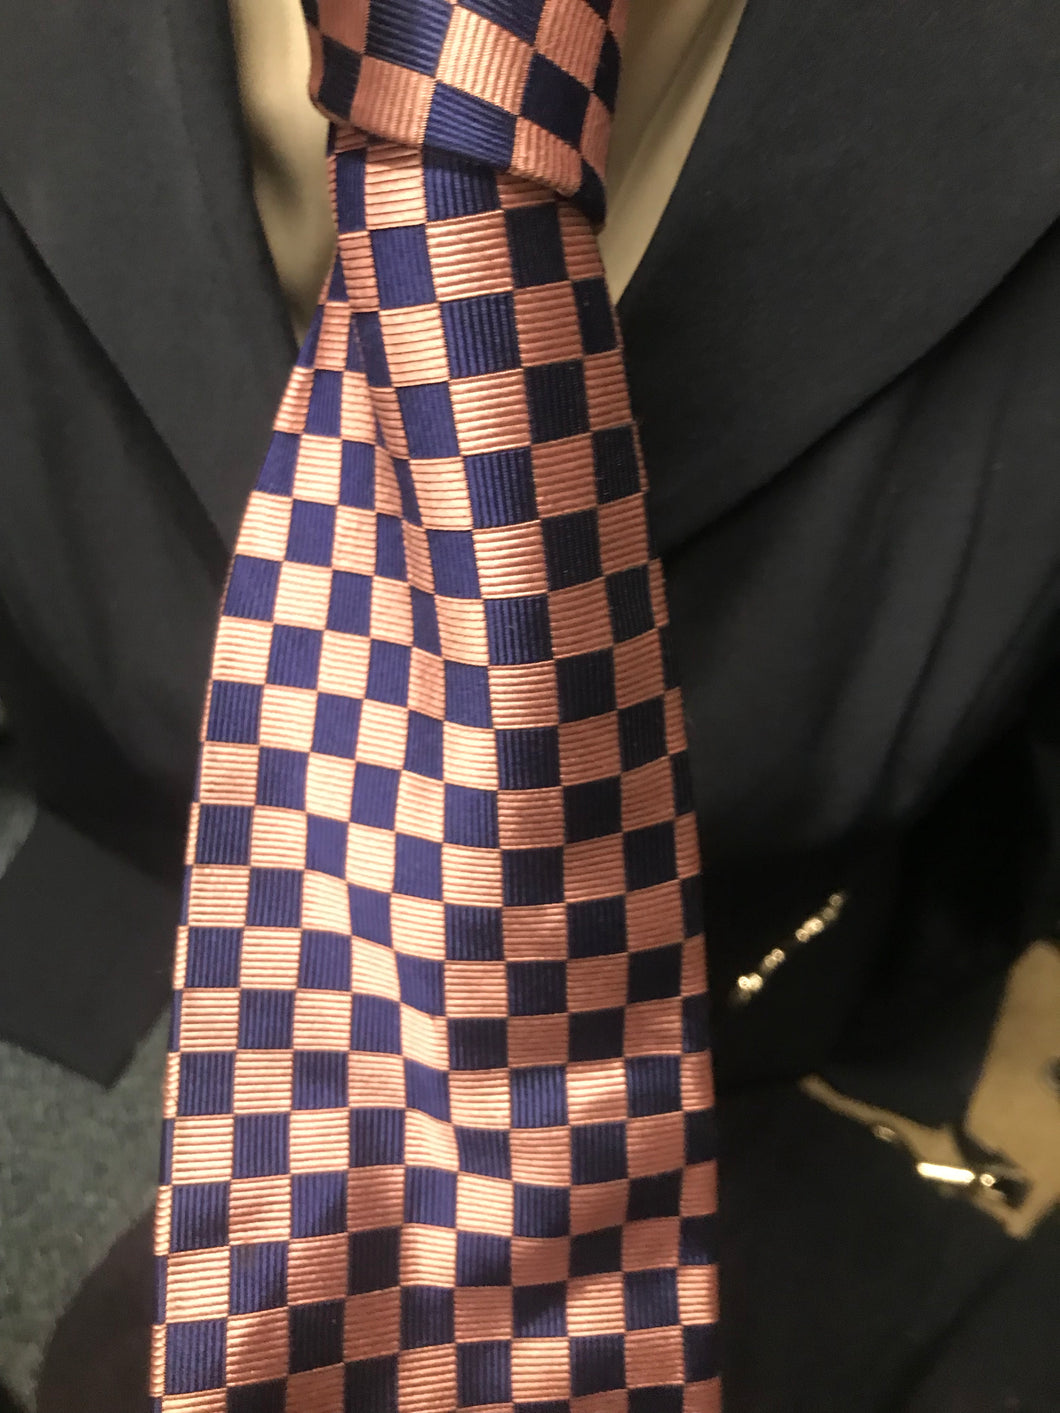 Blush pink and navy checked showing tie FREE POSTAGE ■